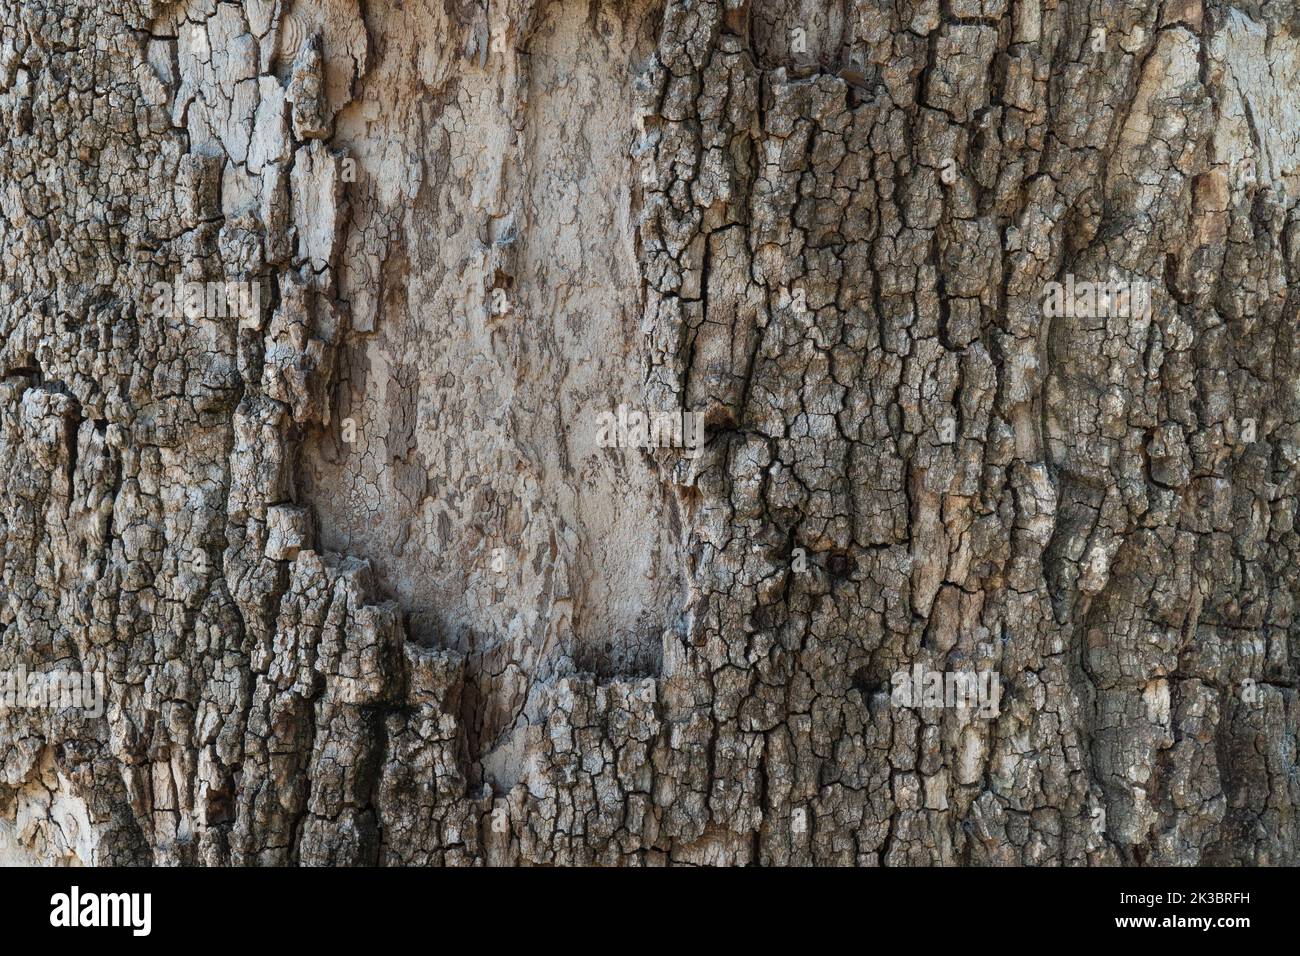 Close-up of tree bark, wooden background with texture Stock Photo